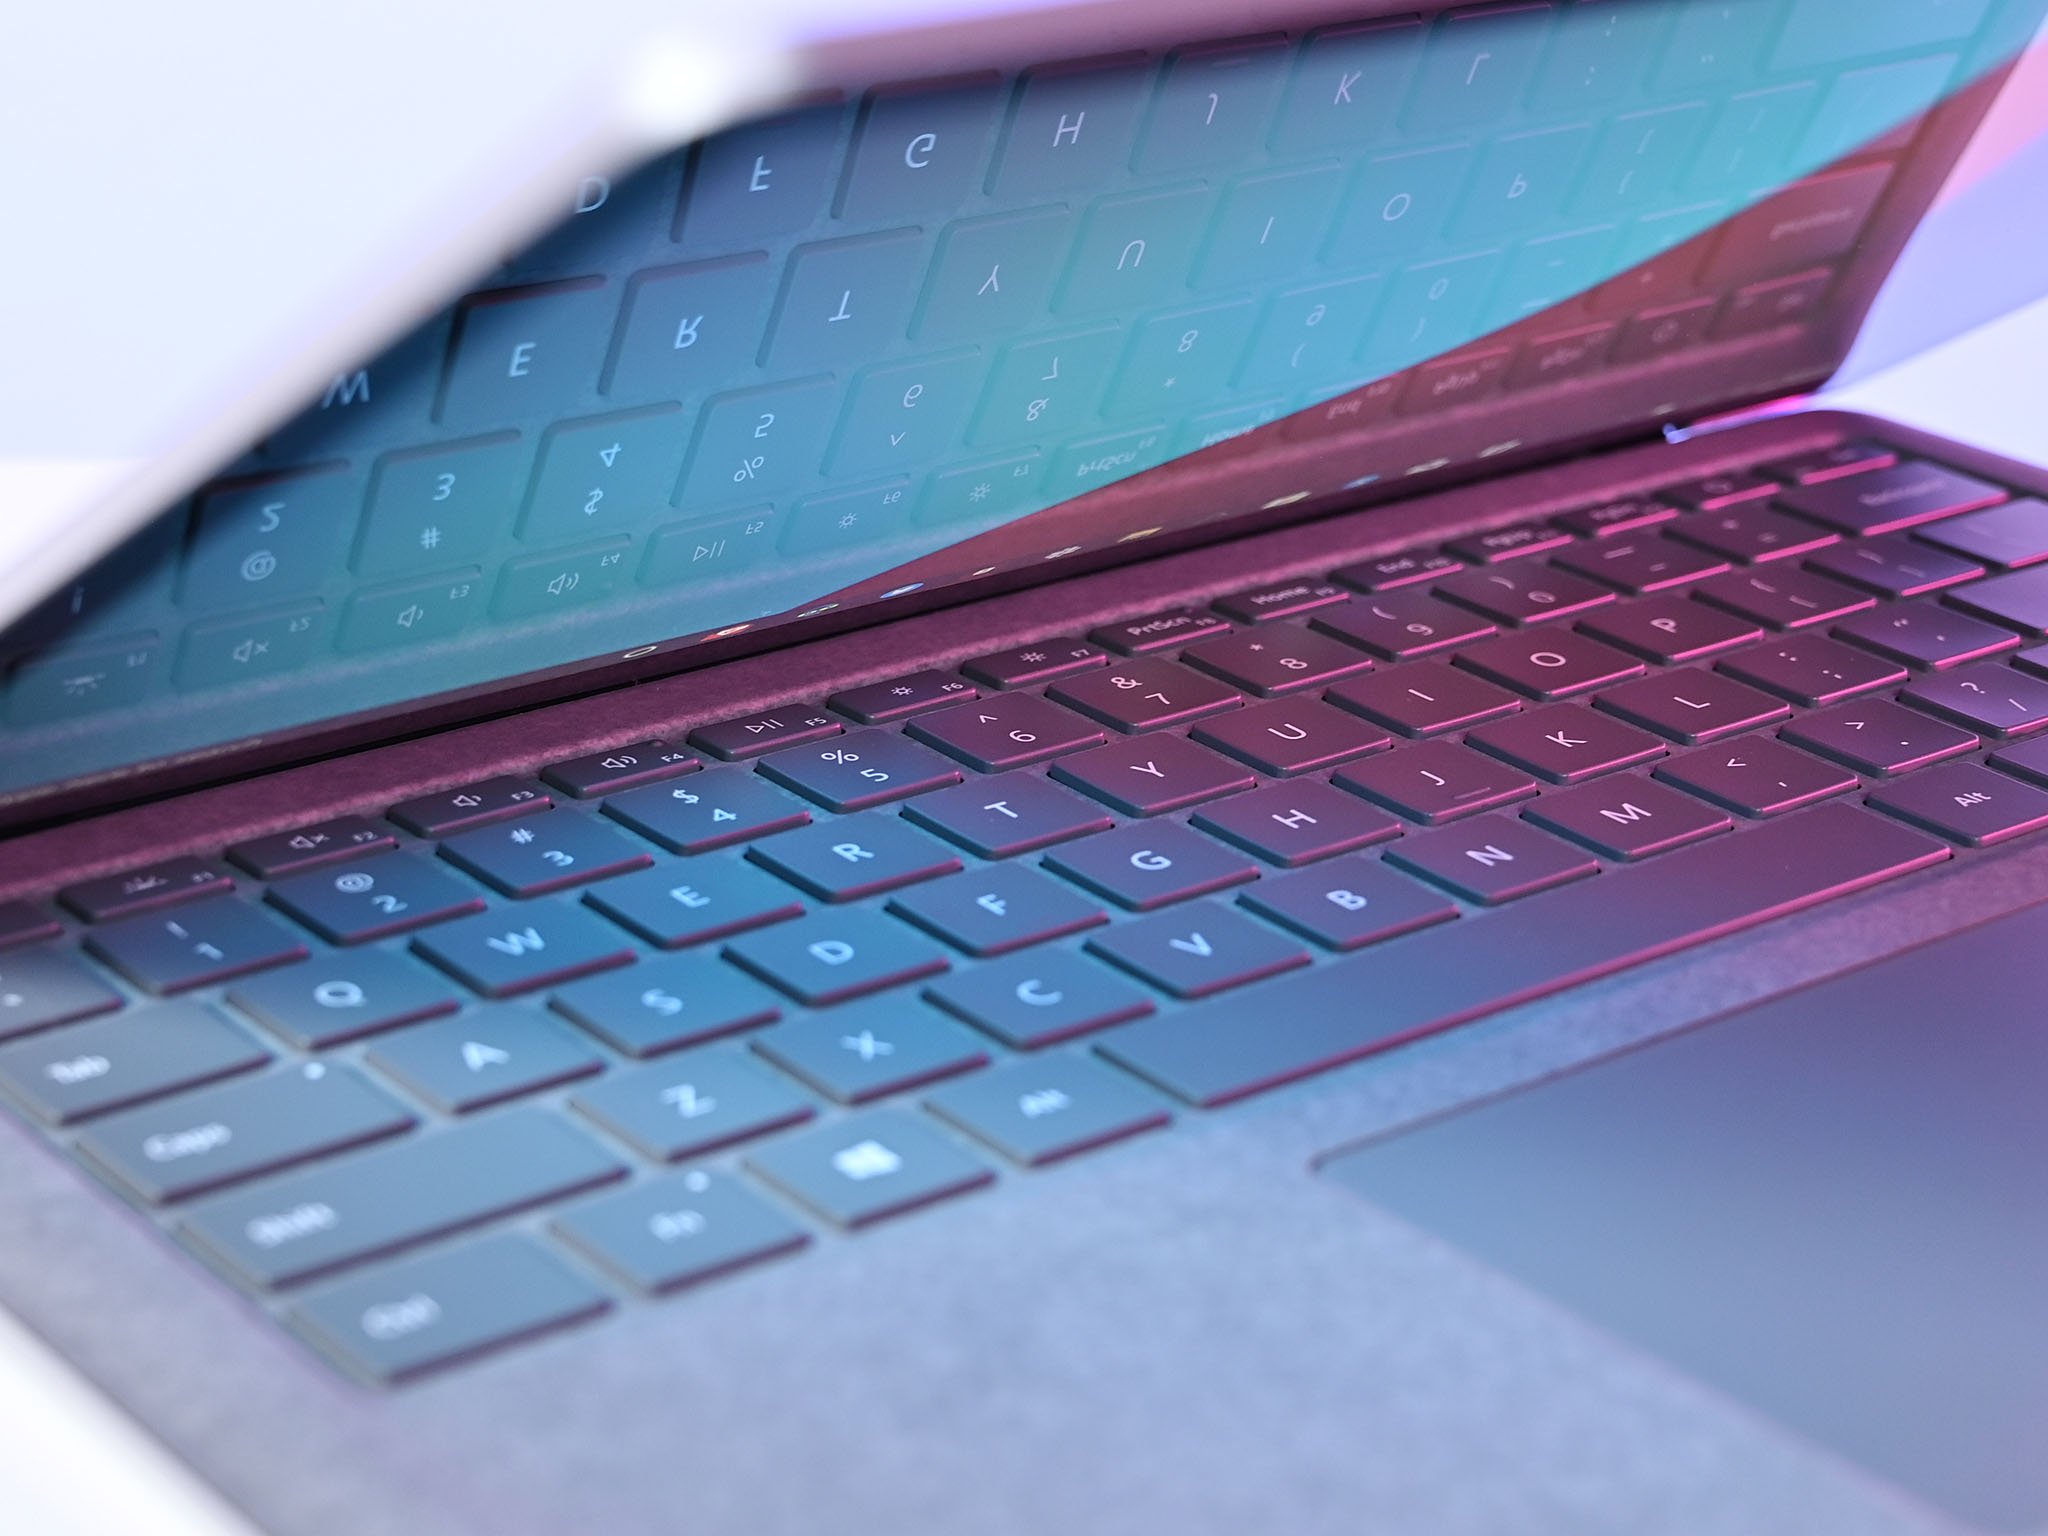 Here's everything you need to know about the Surface Laptop 4